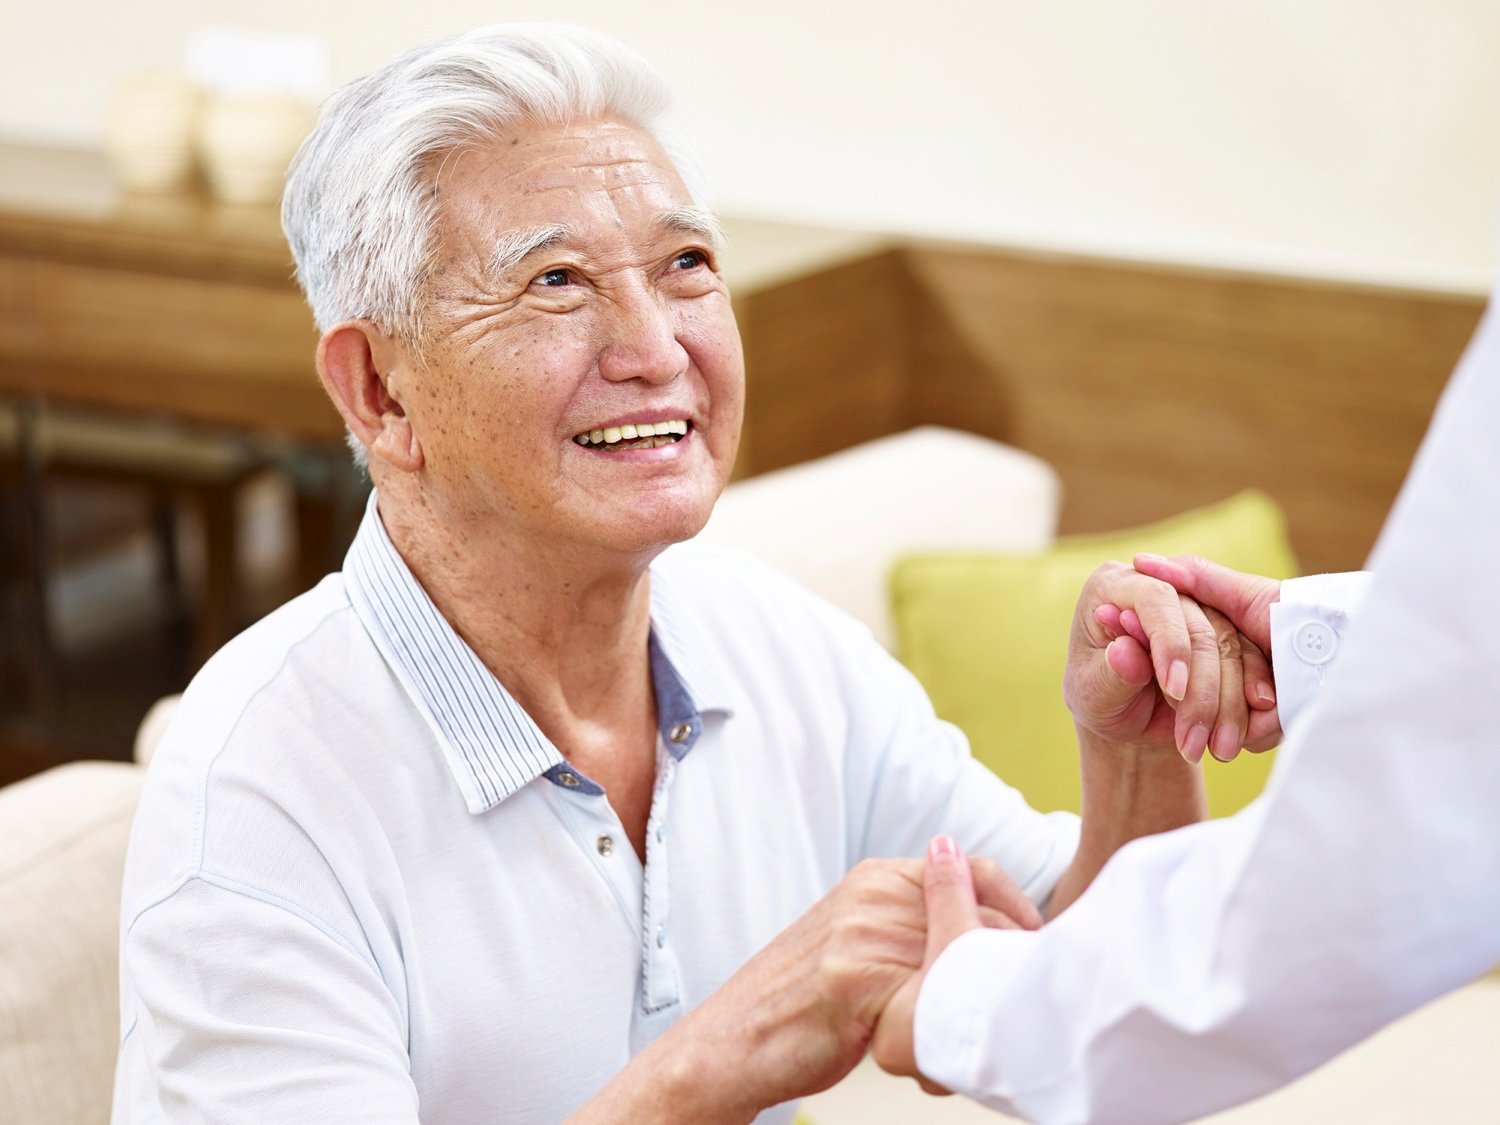 A senior man holding hands with and looking up at his caregiver